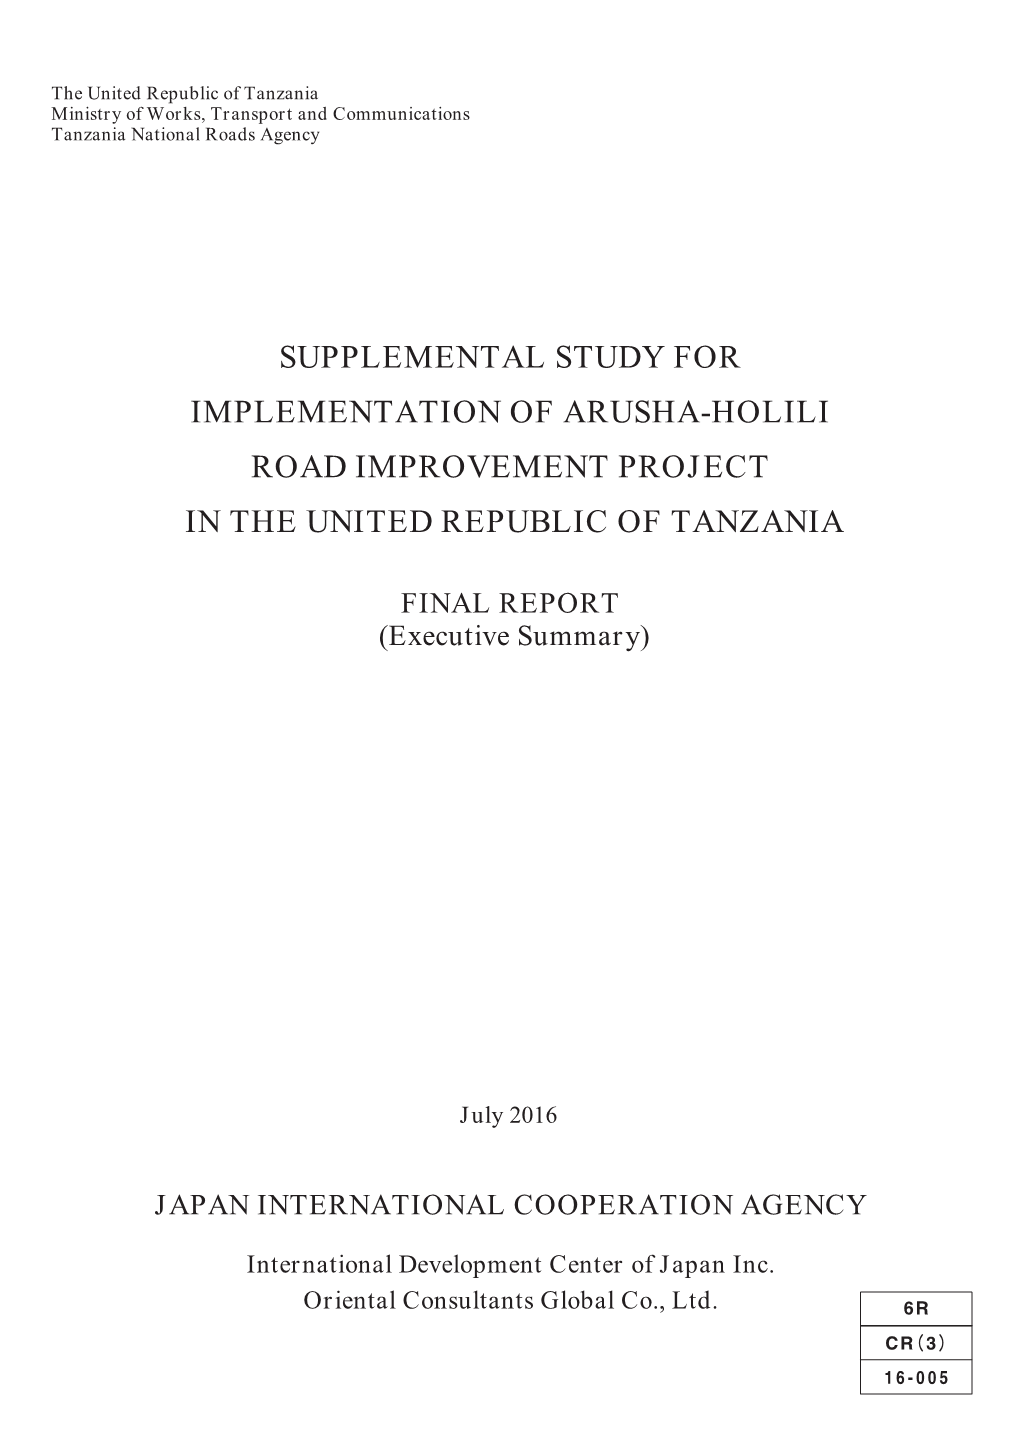 Supplemental Study for Implementation of Arusha-Holili Road Improvement Project in the United Republic of Tanzania